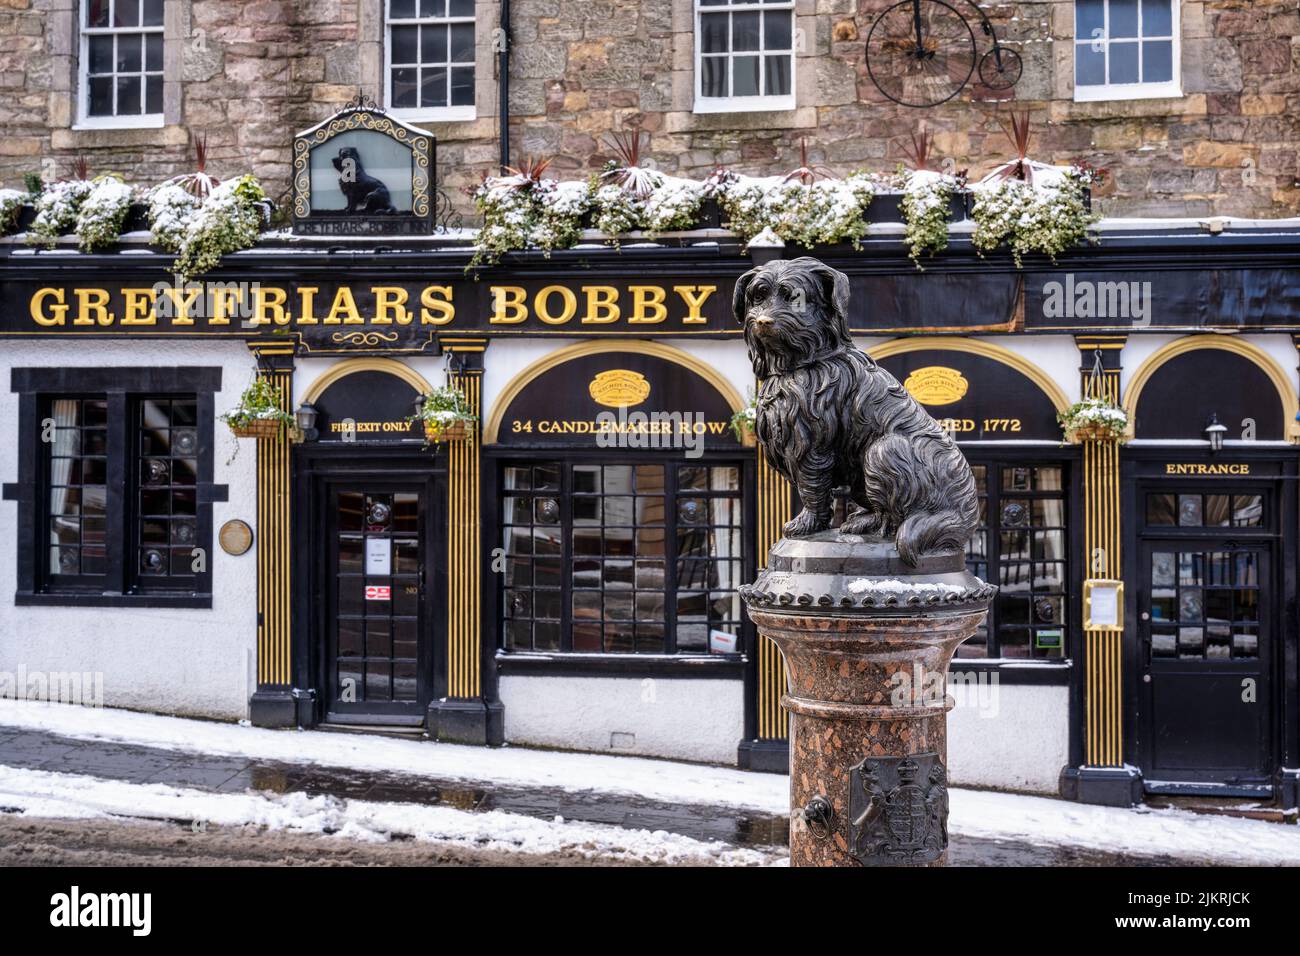 Greyfriars Bobby public House in Snow, Candlemaker Row, Édimbourg, Écosse, Royaume-Uni Banque D'Images